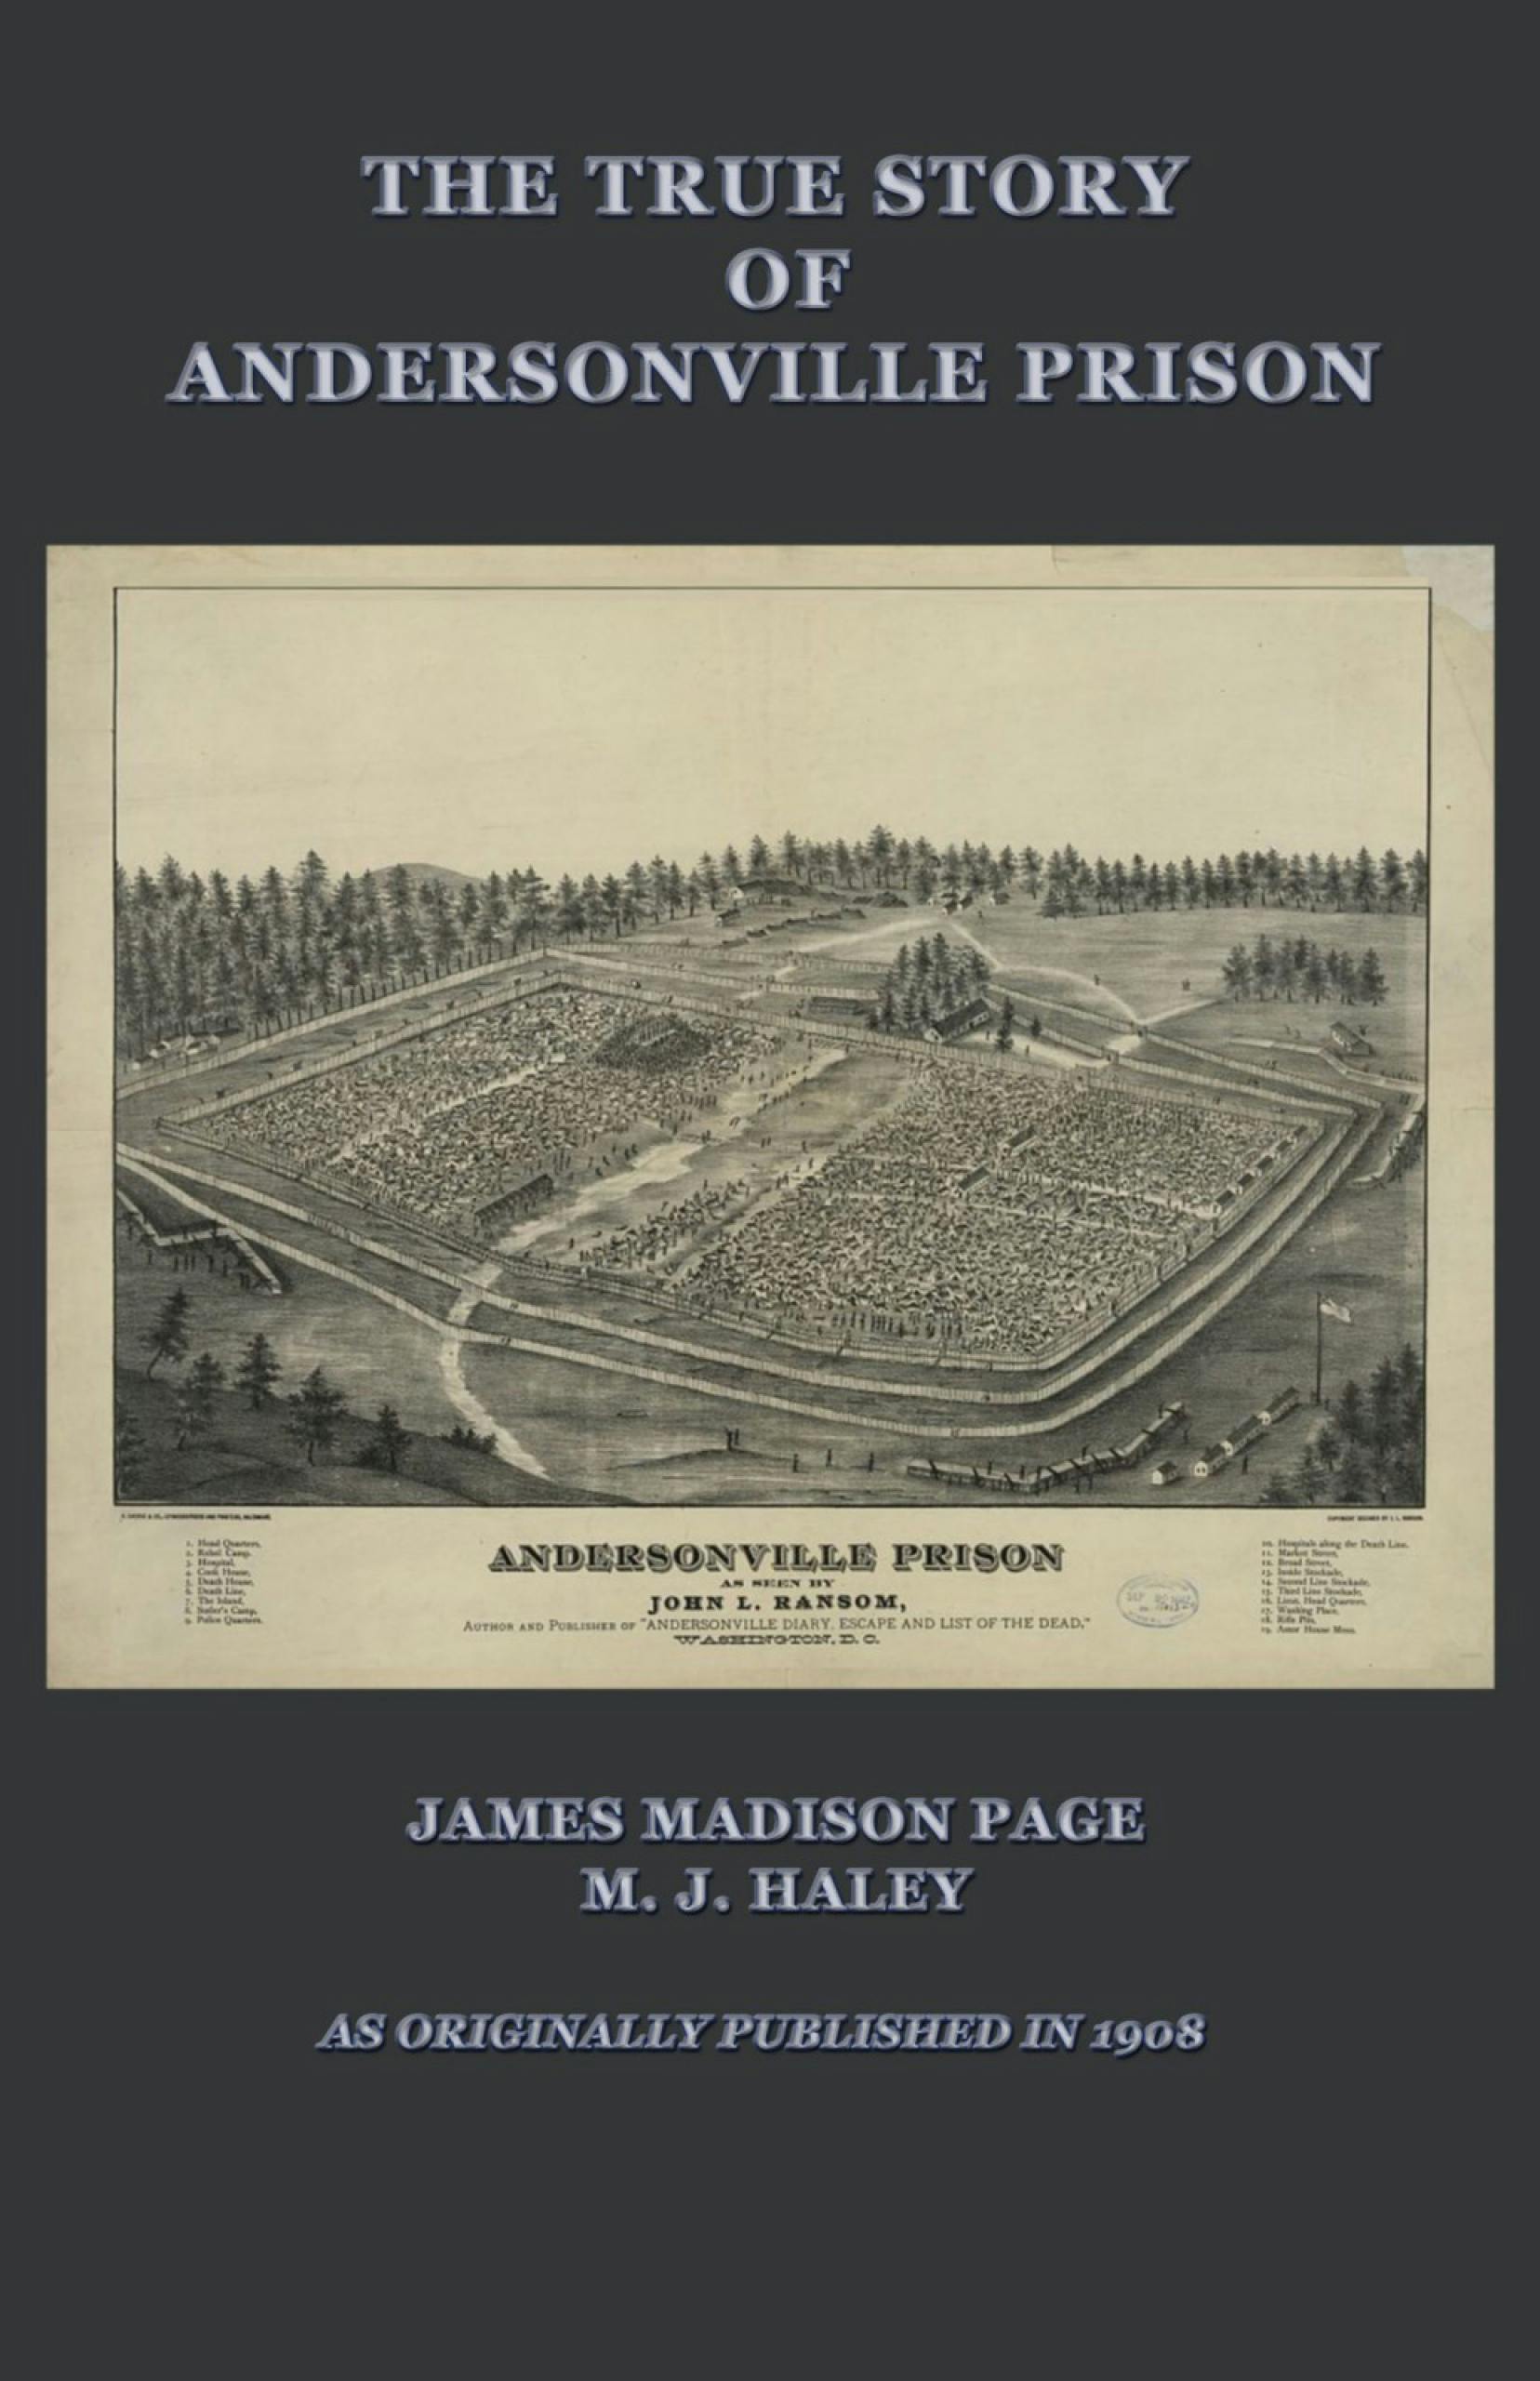 The True Story of Andersonville Prison - undefined